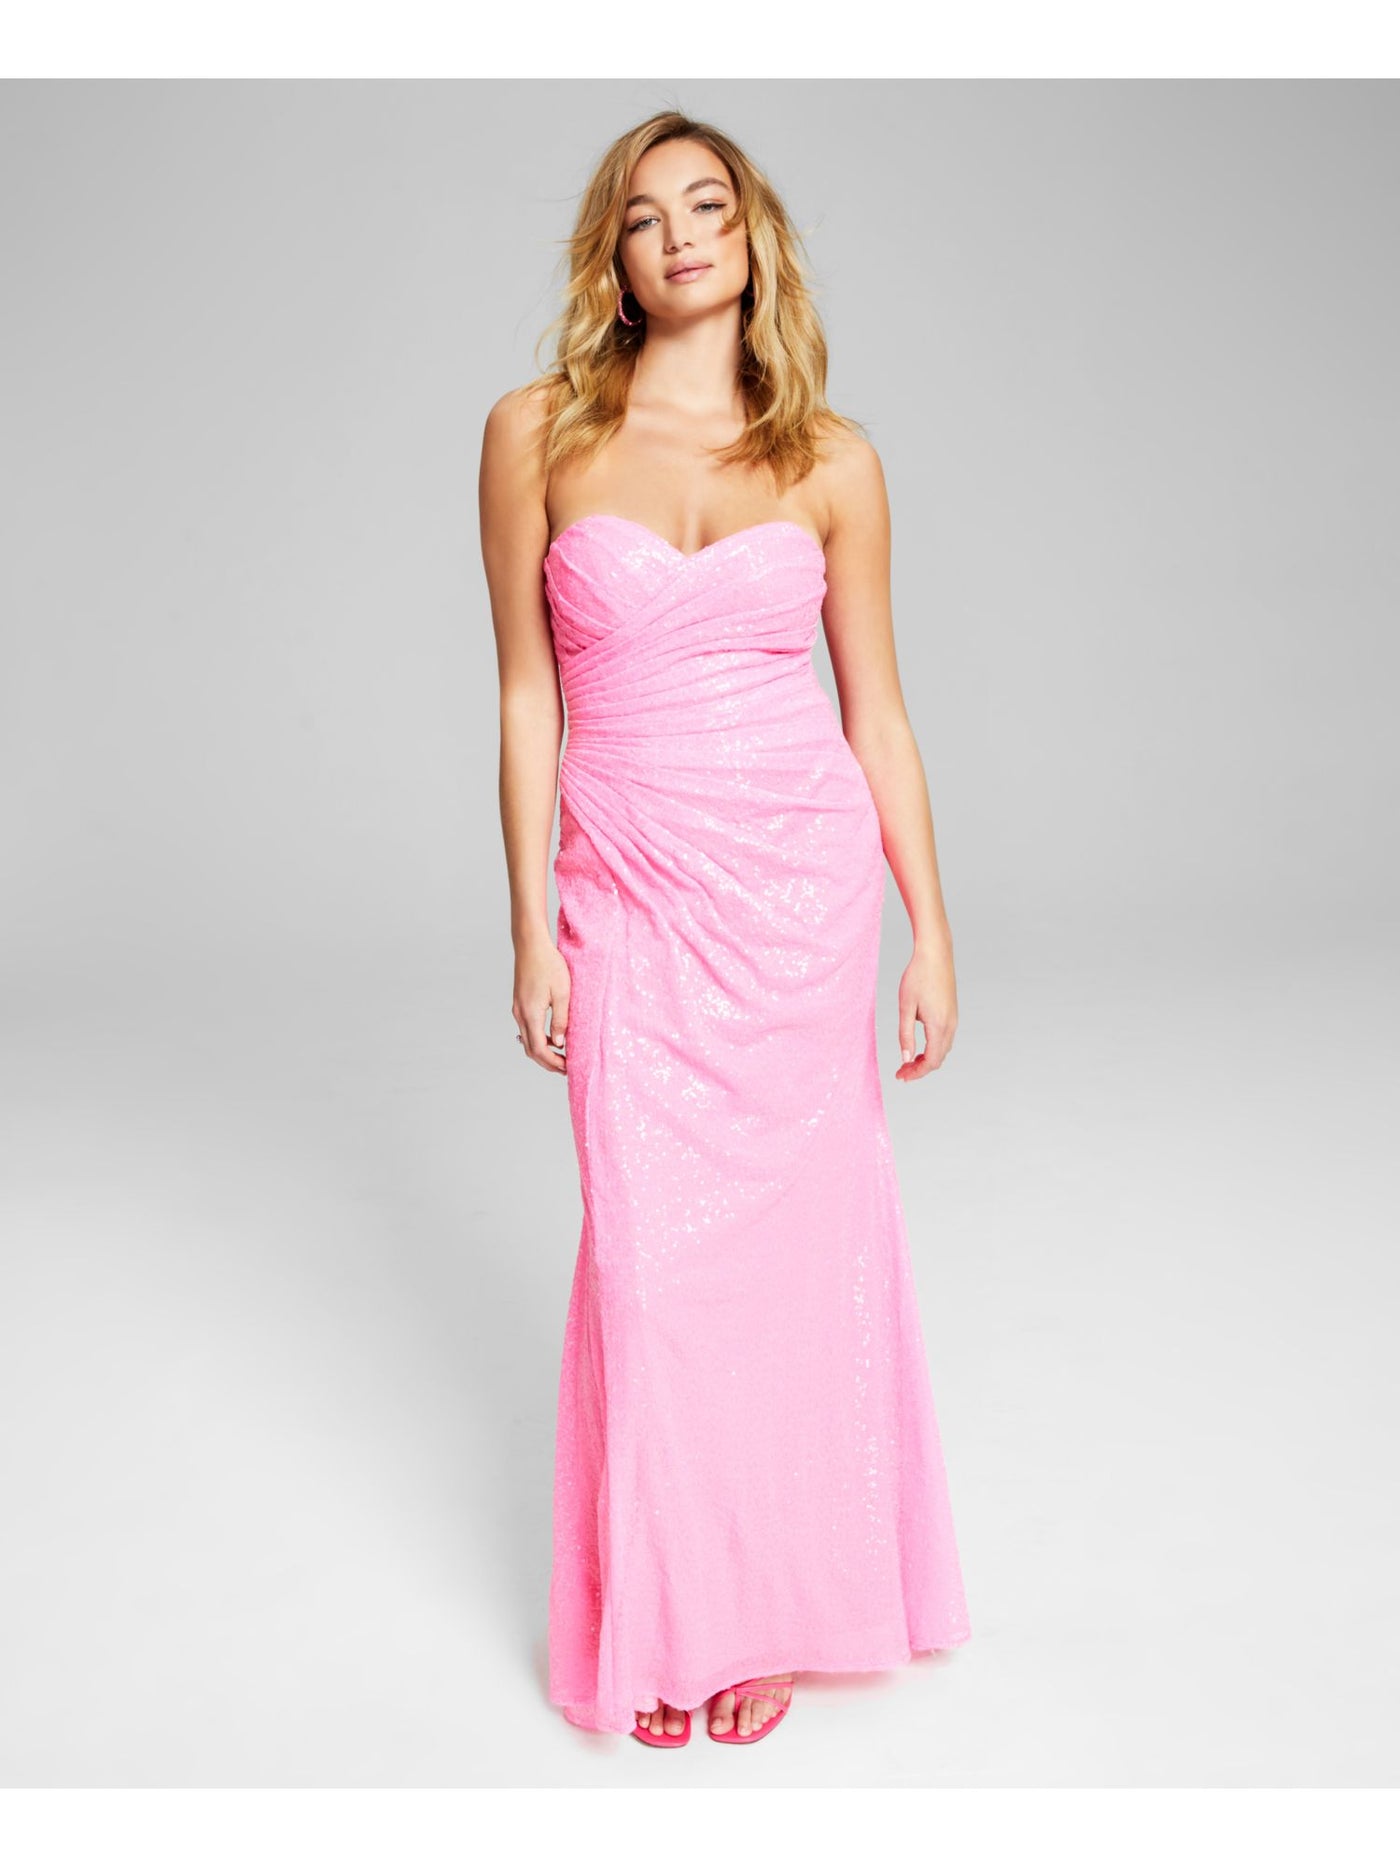 BLONDIE NITES Womens Pink Sequined Zippered Lined Sleeveless Sweetheart Neckline Full-Length Formal Gown Dress Juniors 13